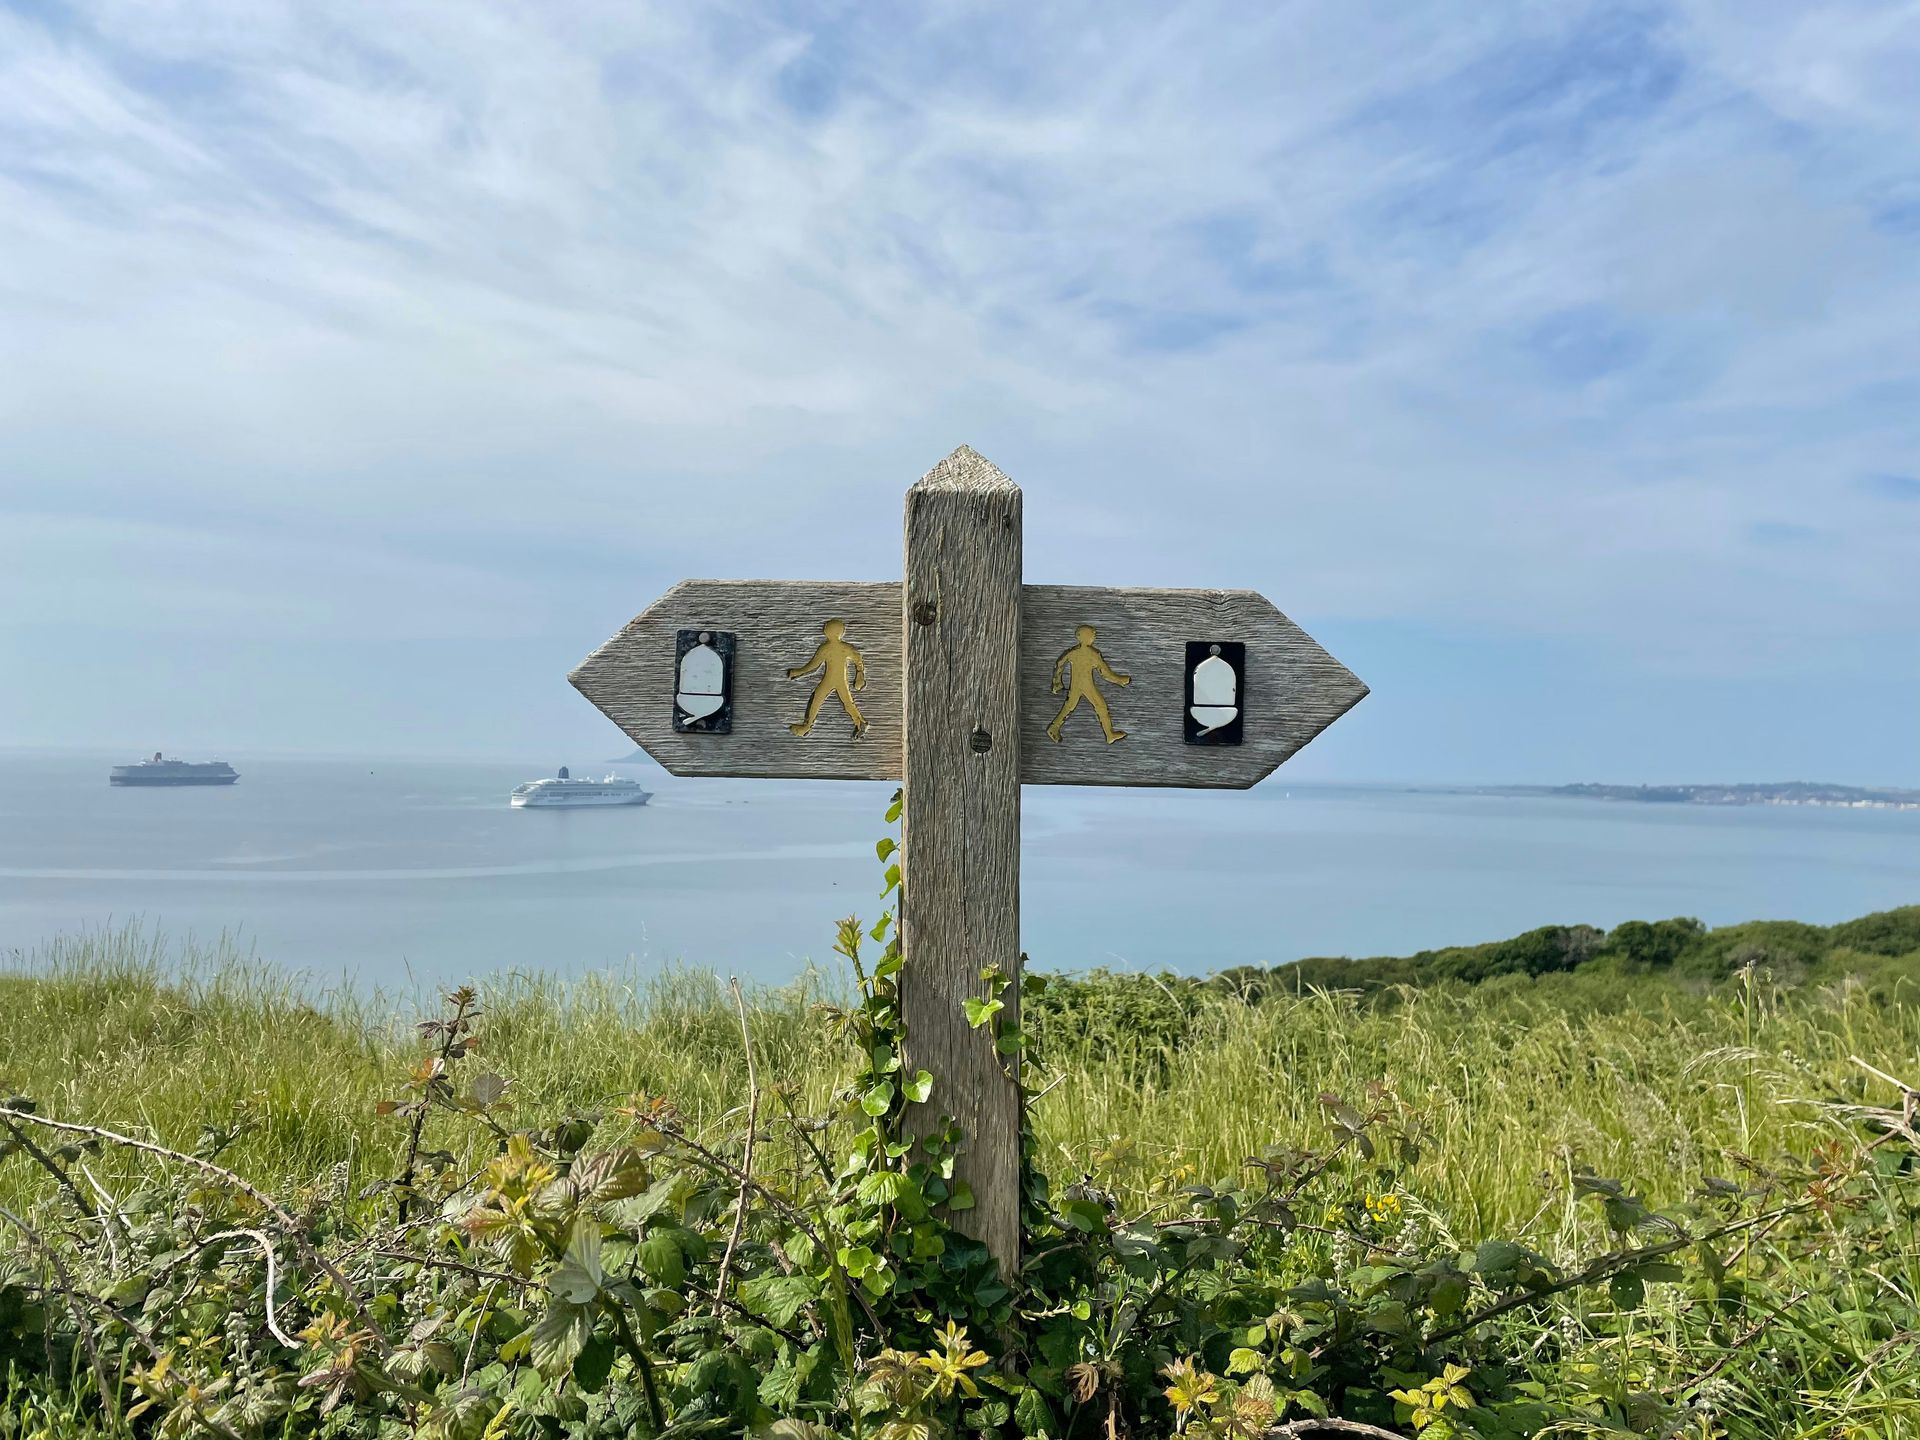 Wooden signpost with walking symbols overlooking serene sea and ships in the distance